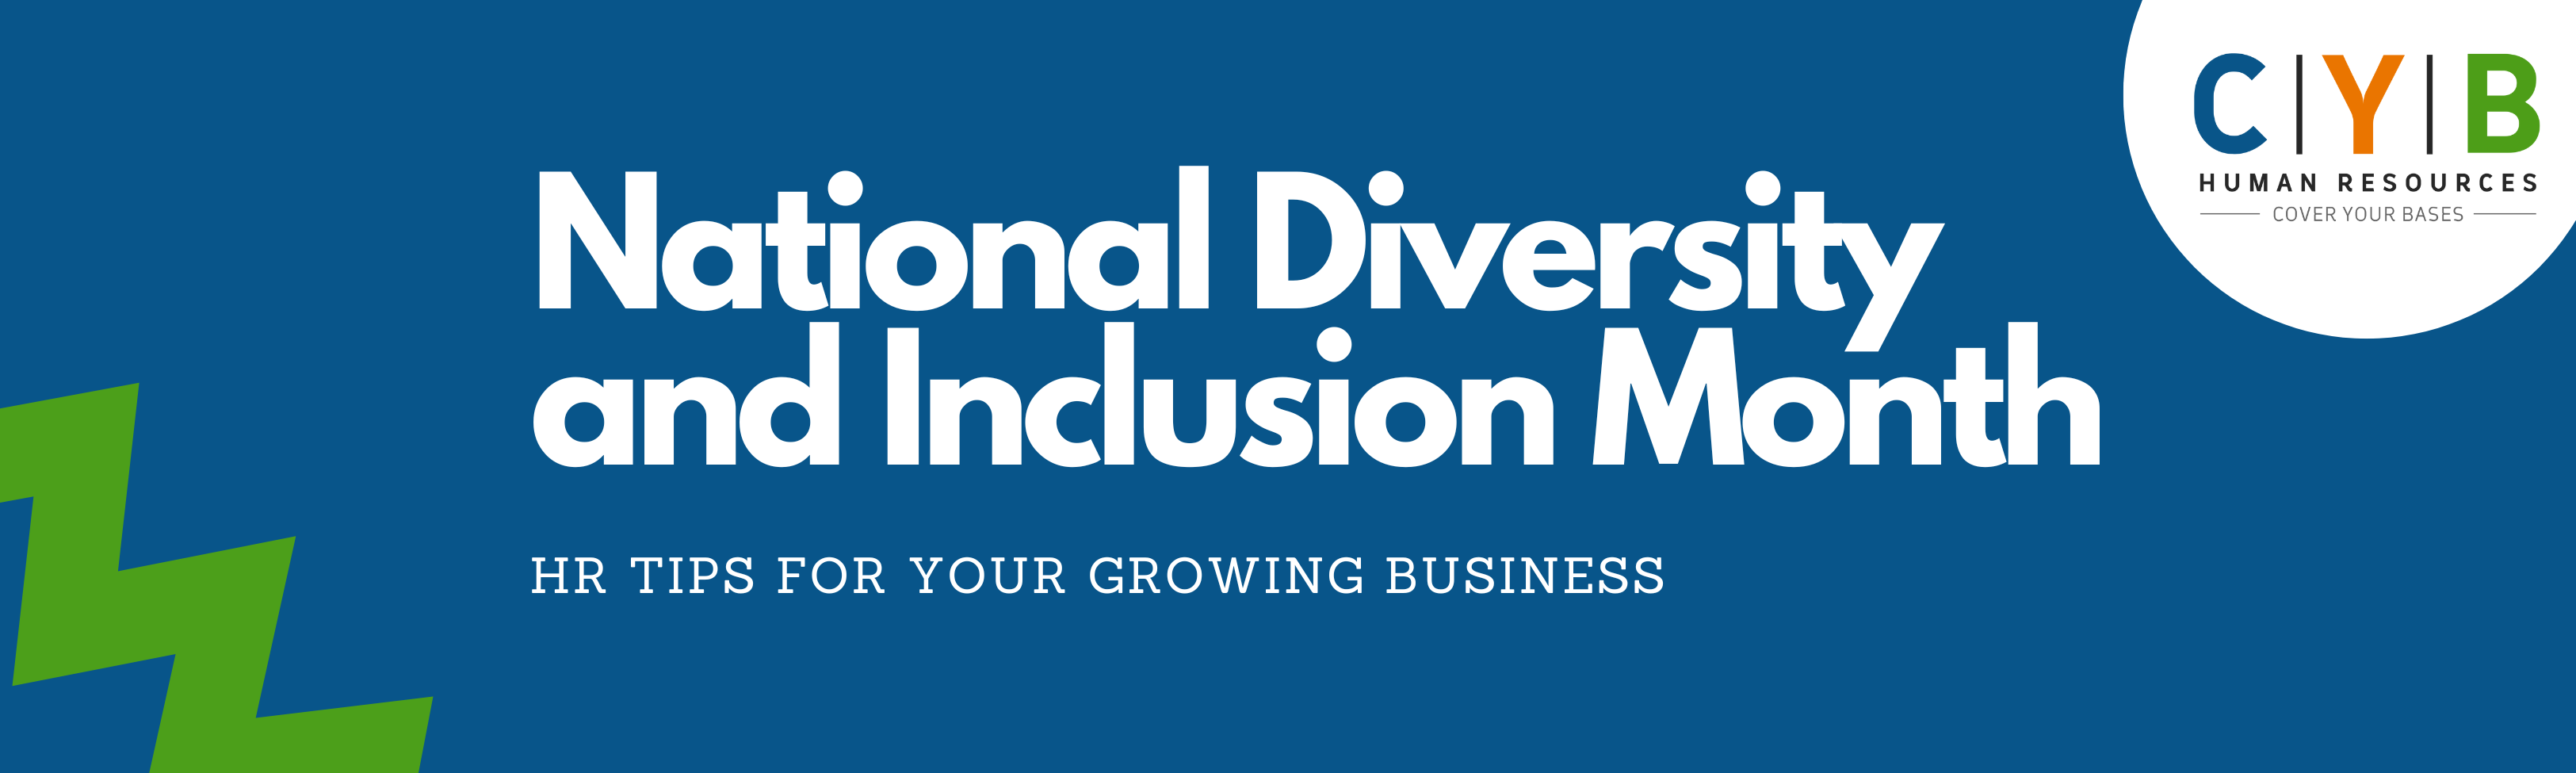 National Diversity and Inclusion Month